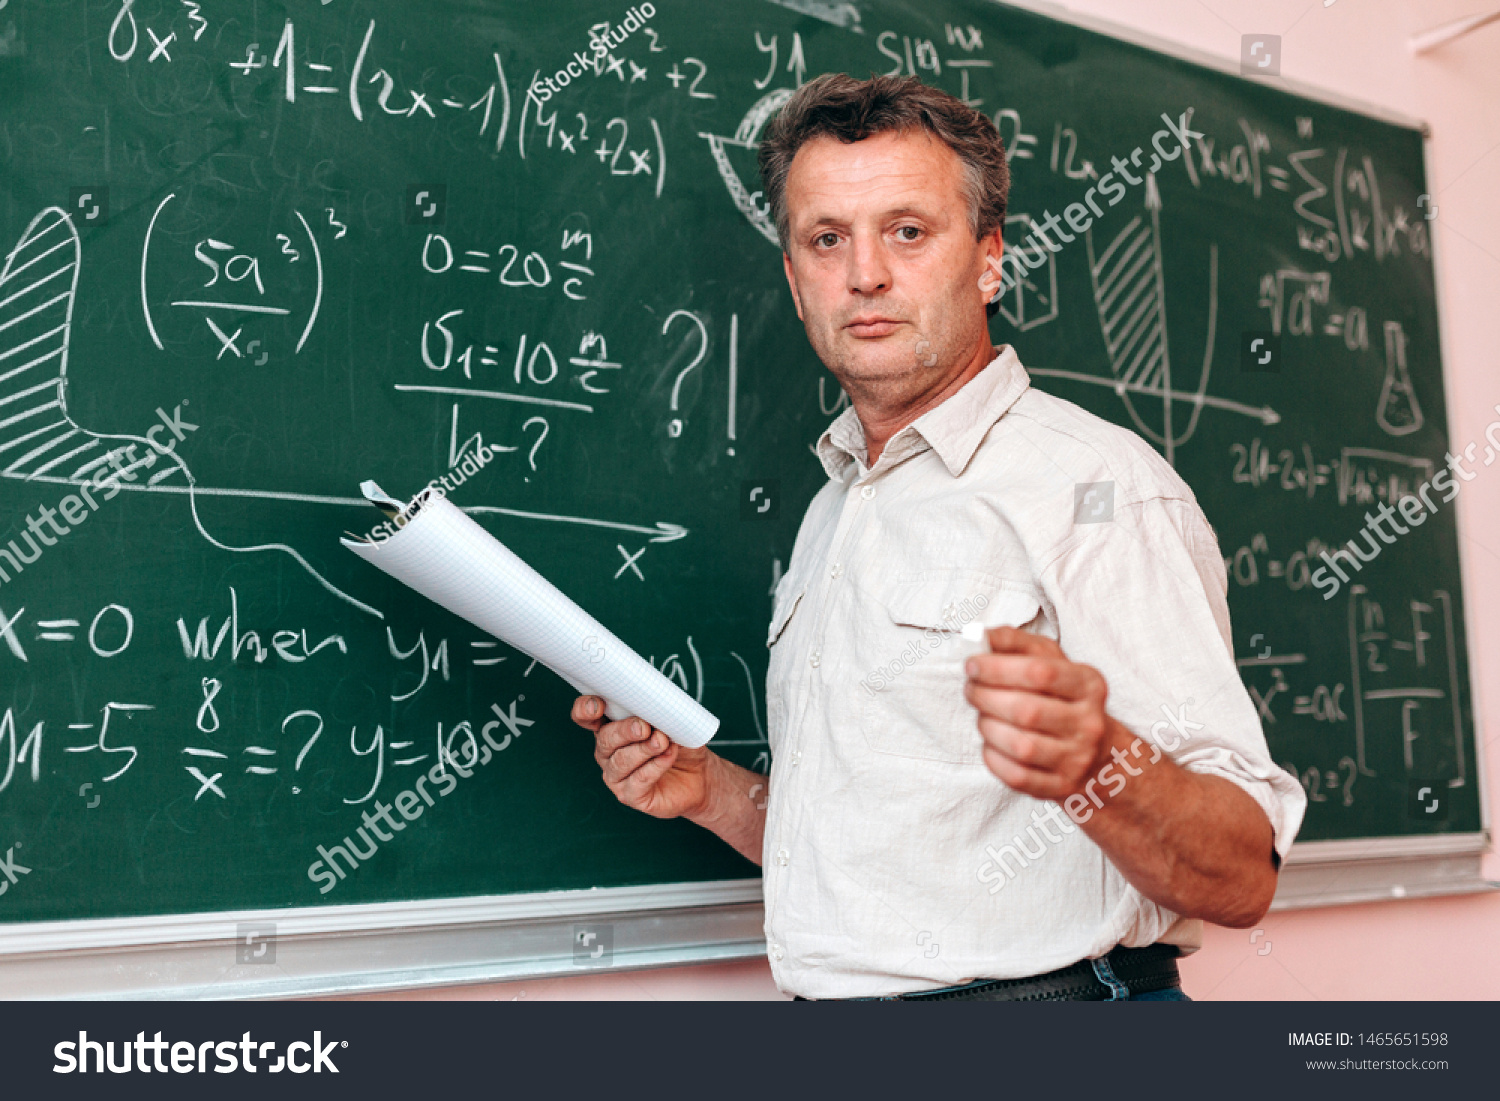 High Quality Teacher without watermark Blank Meme Template